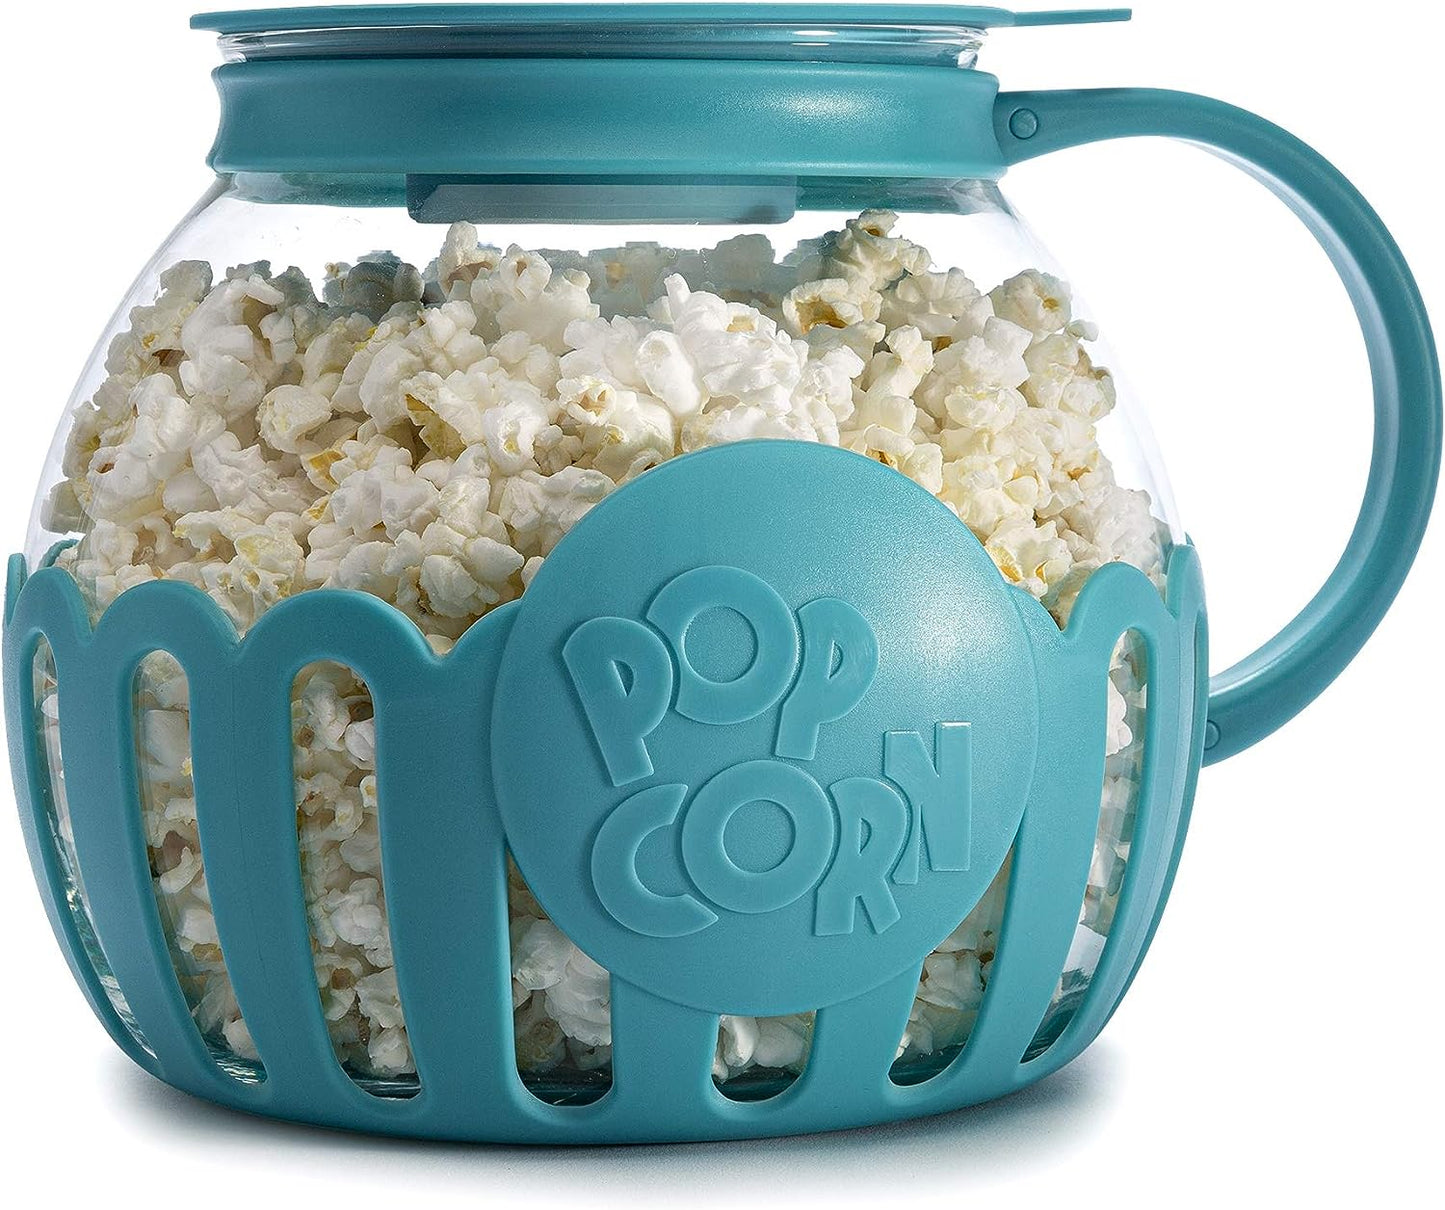 Superior Micro-Pop Microwave Popcorn Popper with Temperature Safe Glass, 3-in-1 Lid Measures Kernels and Melts Butter, Made Without BPA, Dishwasher Safe, 3-Quart, Red